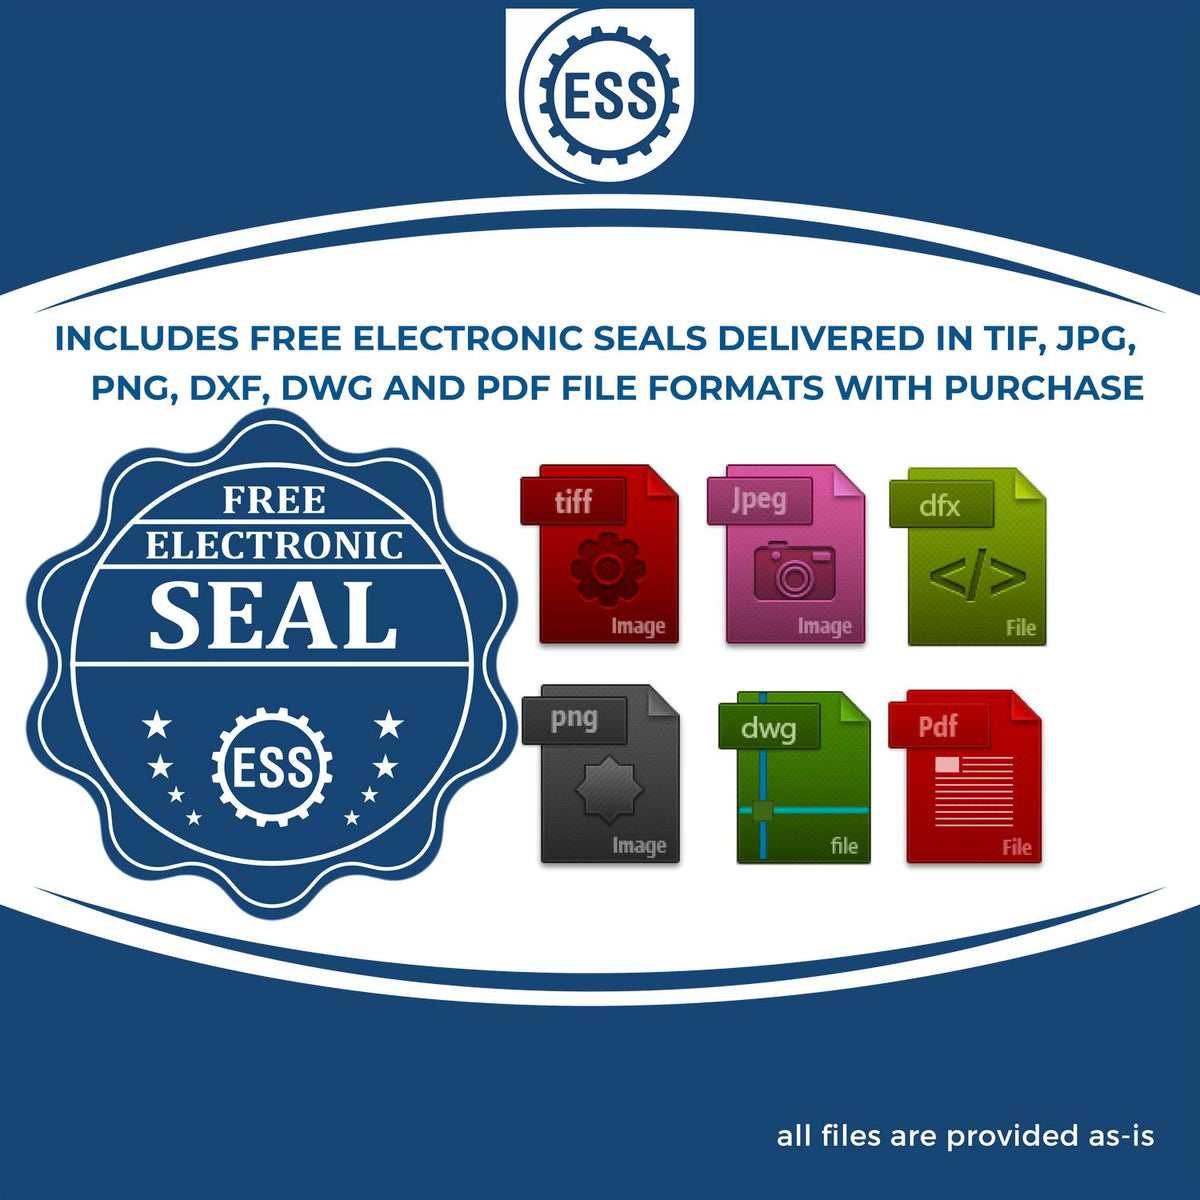 An infographic for the free electronic seal for the Long Reach West Virginia PE Seal illustrating the different file type icons such as DXF, DWG, TIF, JPG and PNG.